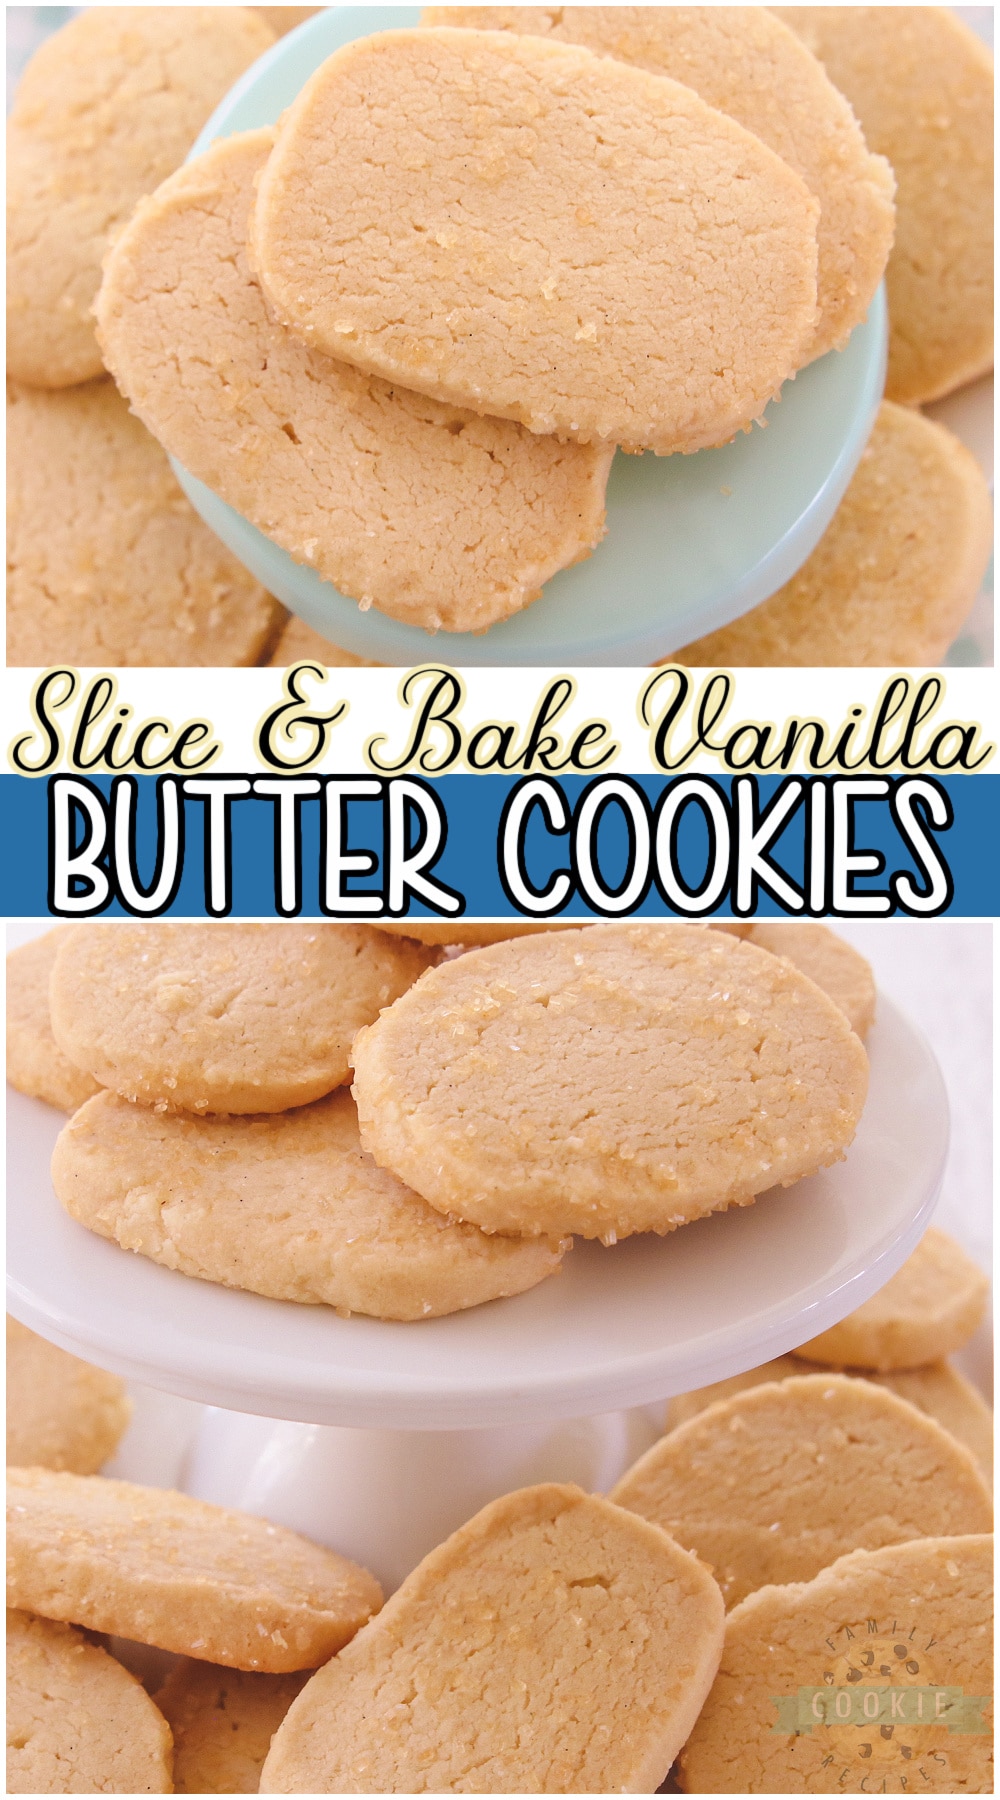 Slice & Bake Vanilla Butter cookies are a wonderful buttery shortbread cookie packed with delicious vanilla flavor. Simple to make with few ingredients, butter cookies are a favorite!  via @buttergirls